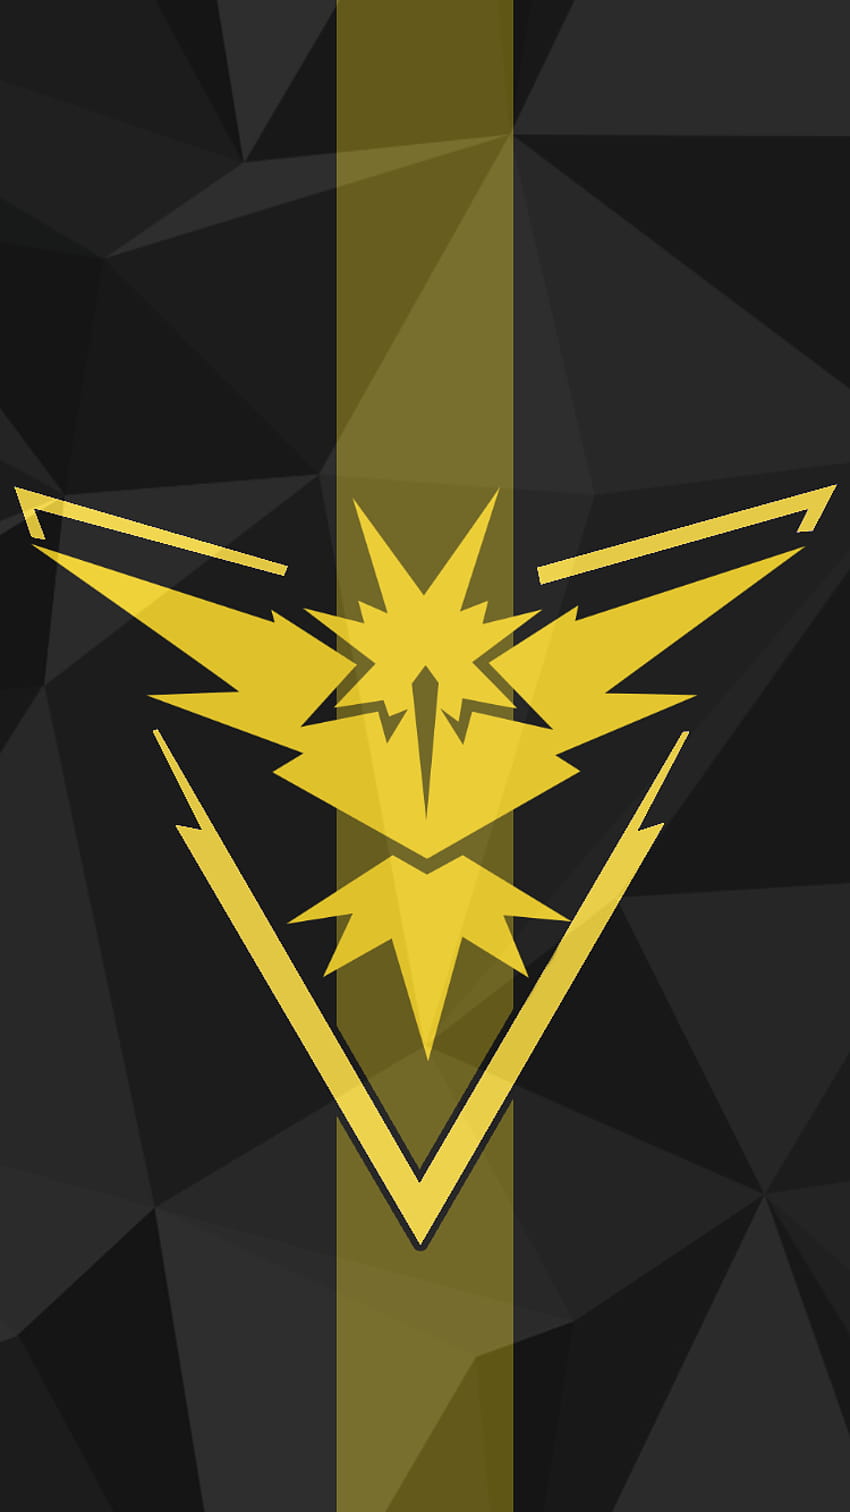 i also captured 4 gym for team yellow, and decided to make a, gym logo iphone HD phone wallpaper